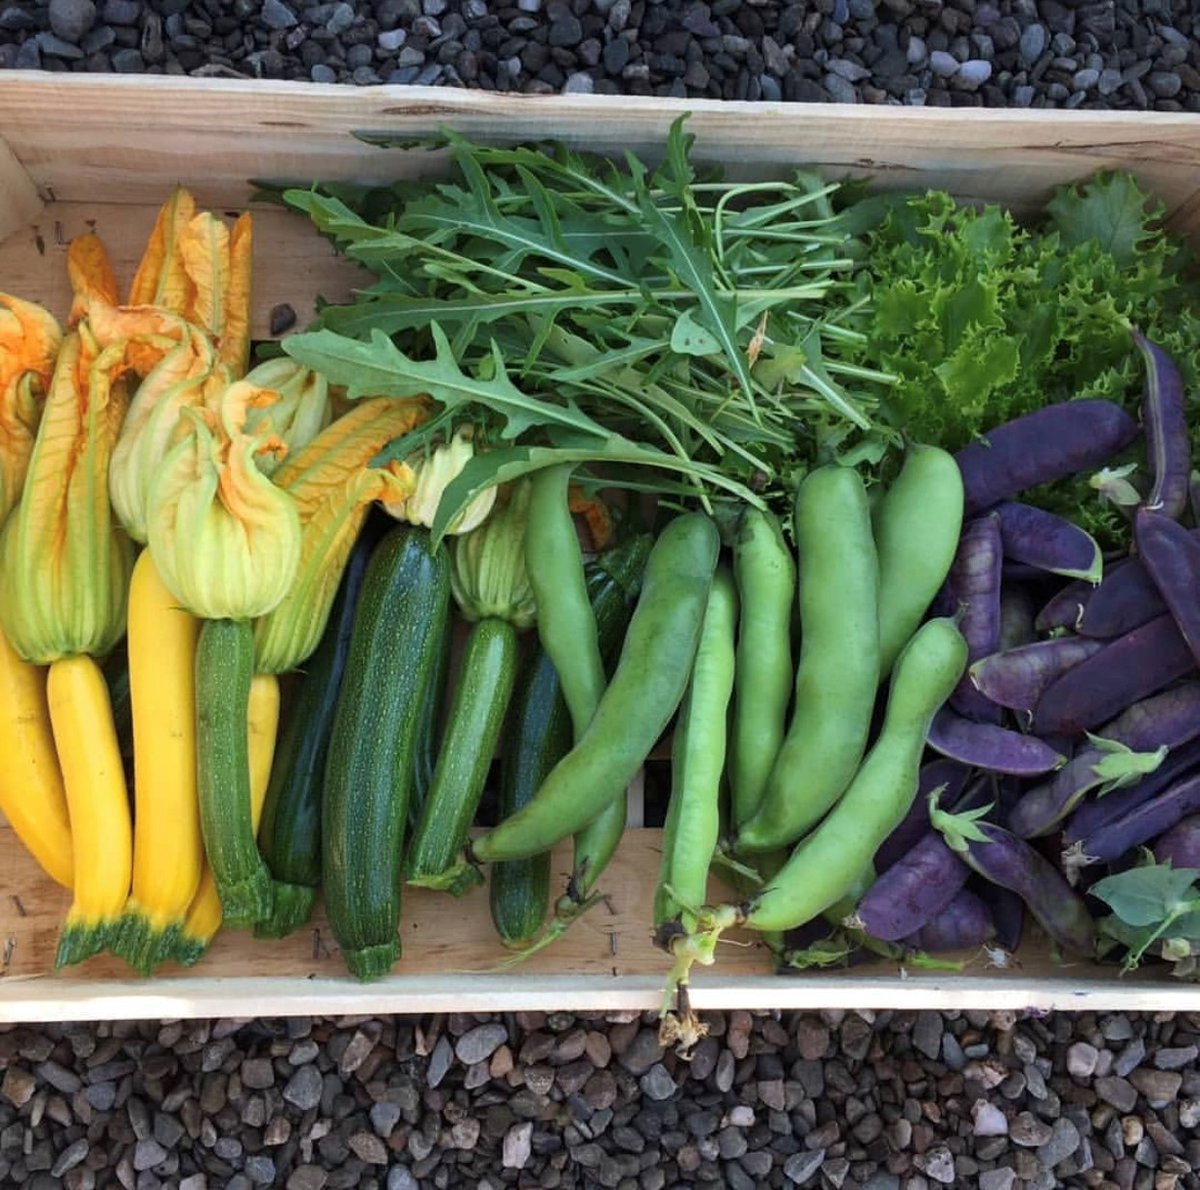 Some of the vegetables grown in our kitchen gardens. Providing inspiration for our Chefs to prepare the most delicious menus made from seasonal homegrown produce 🥕🍆 #CromlixHotel #Smallluxuryhotels #visitscotland #Dunblane #homegrownvegetables #finedining